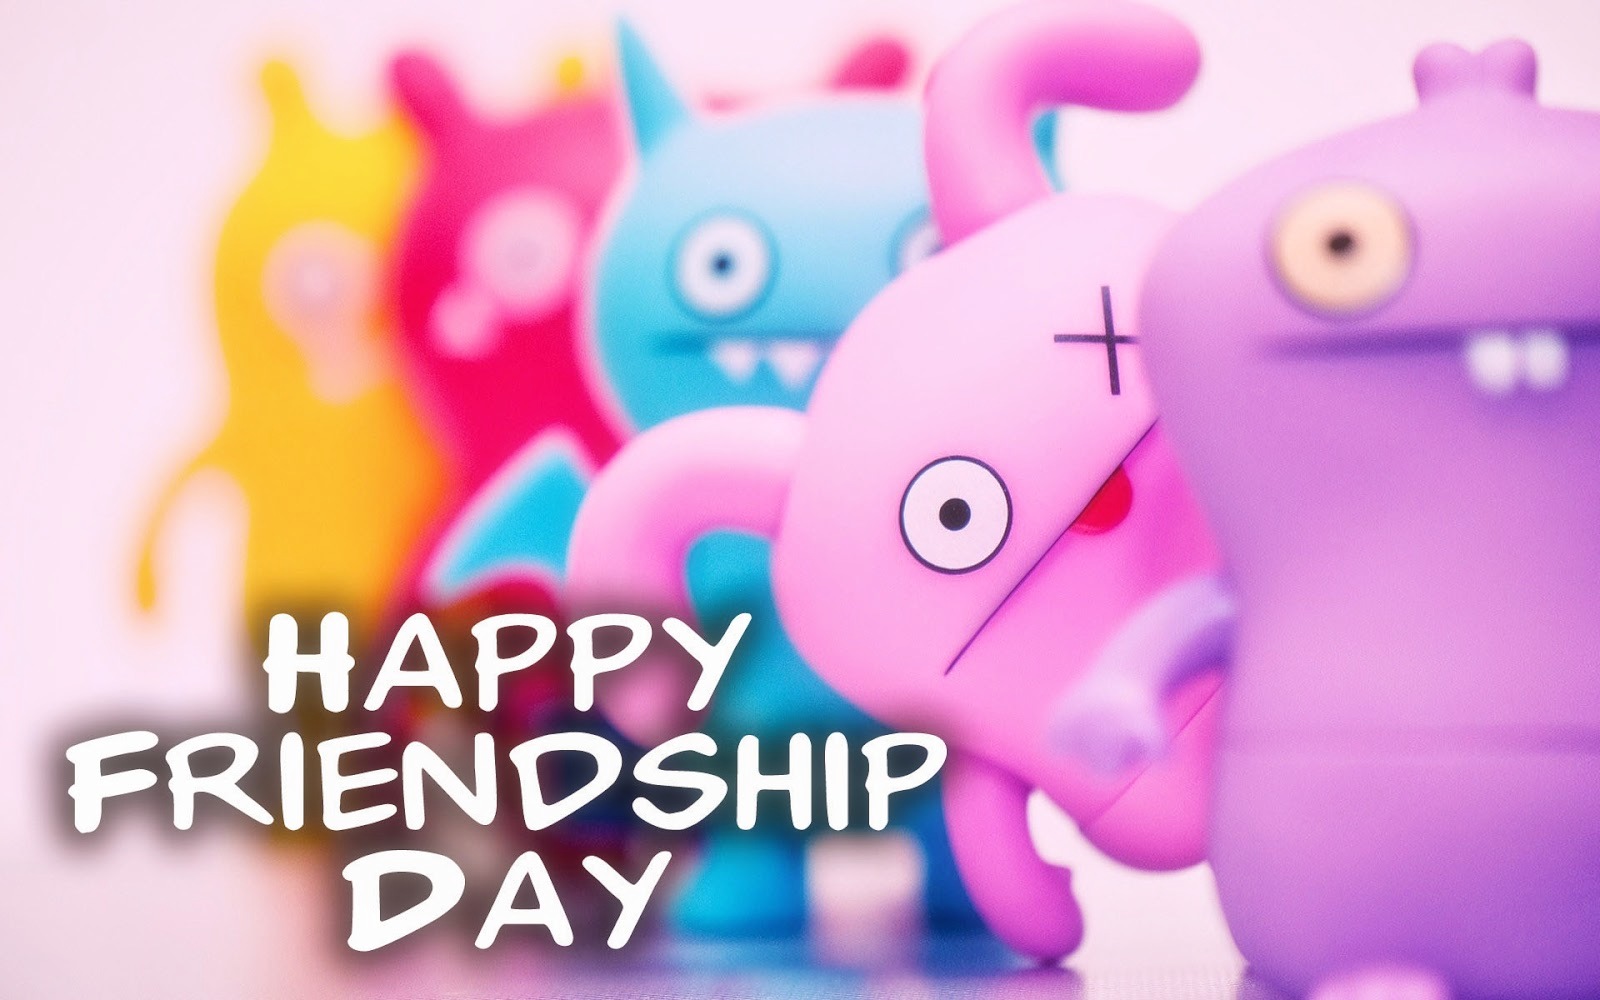 Friendship Day Whatsapp Dp Images - Happy Friendship Day Images Download Hd  - 1600x1000 Wallpaper 